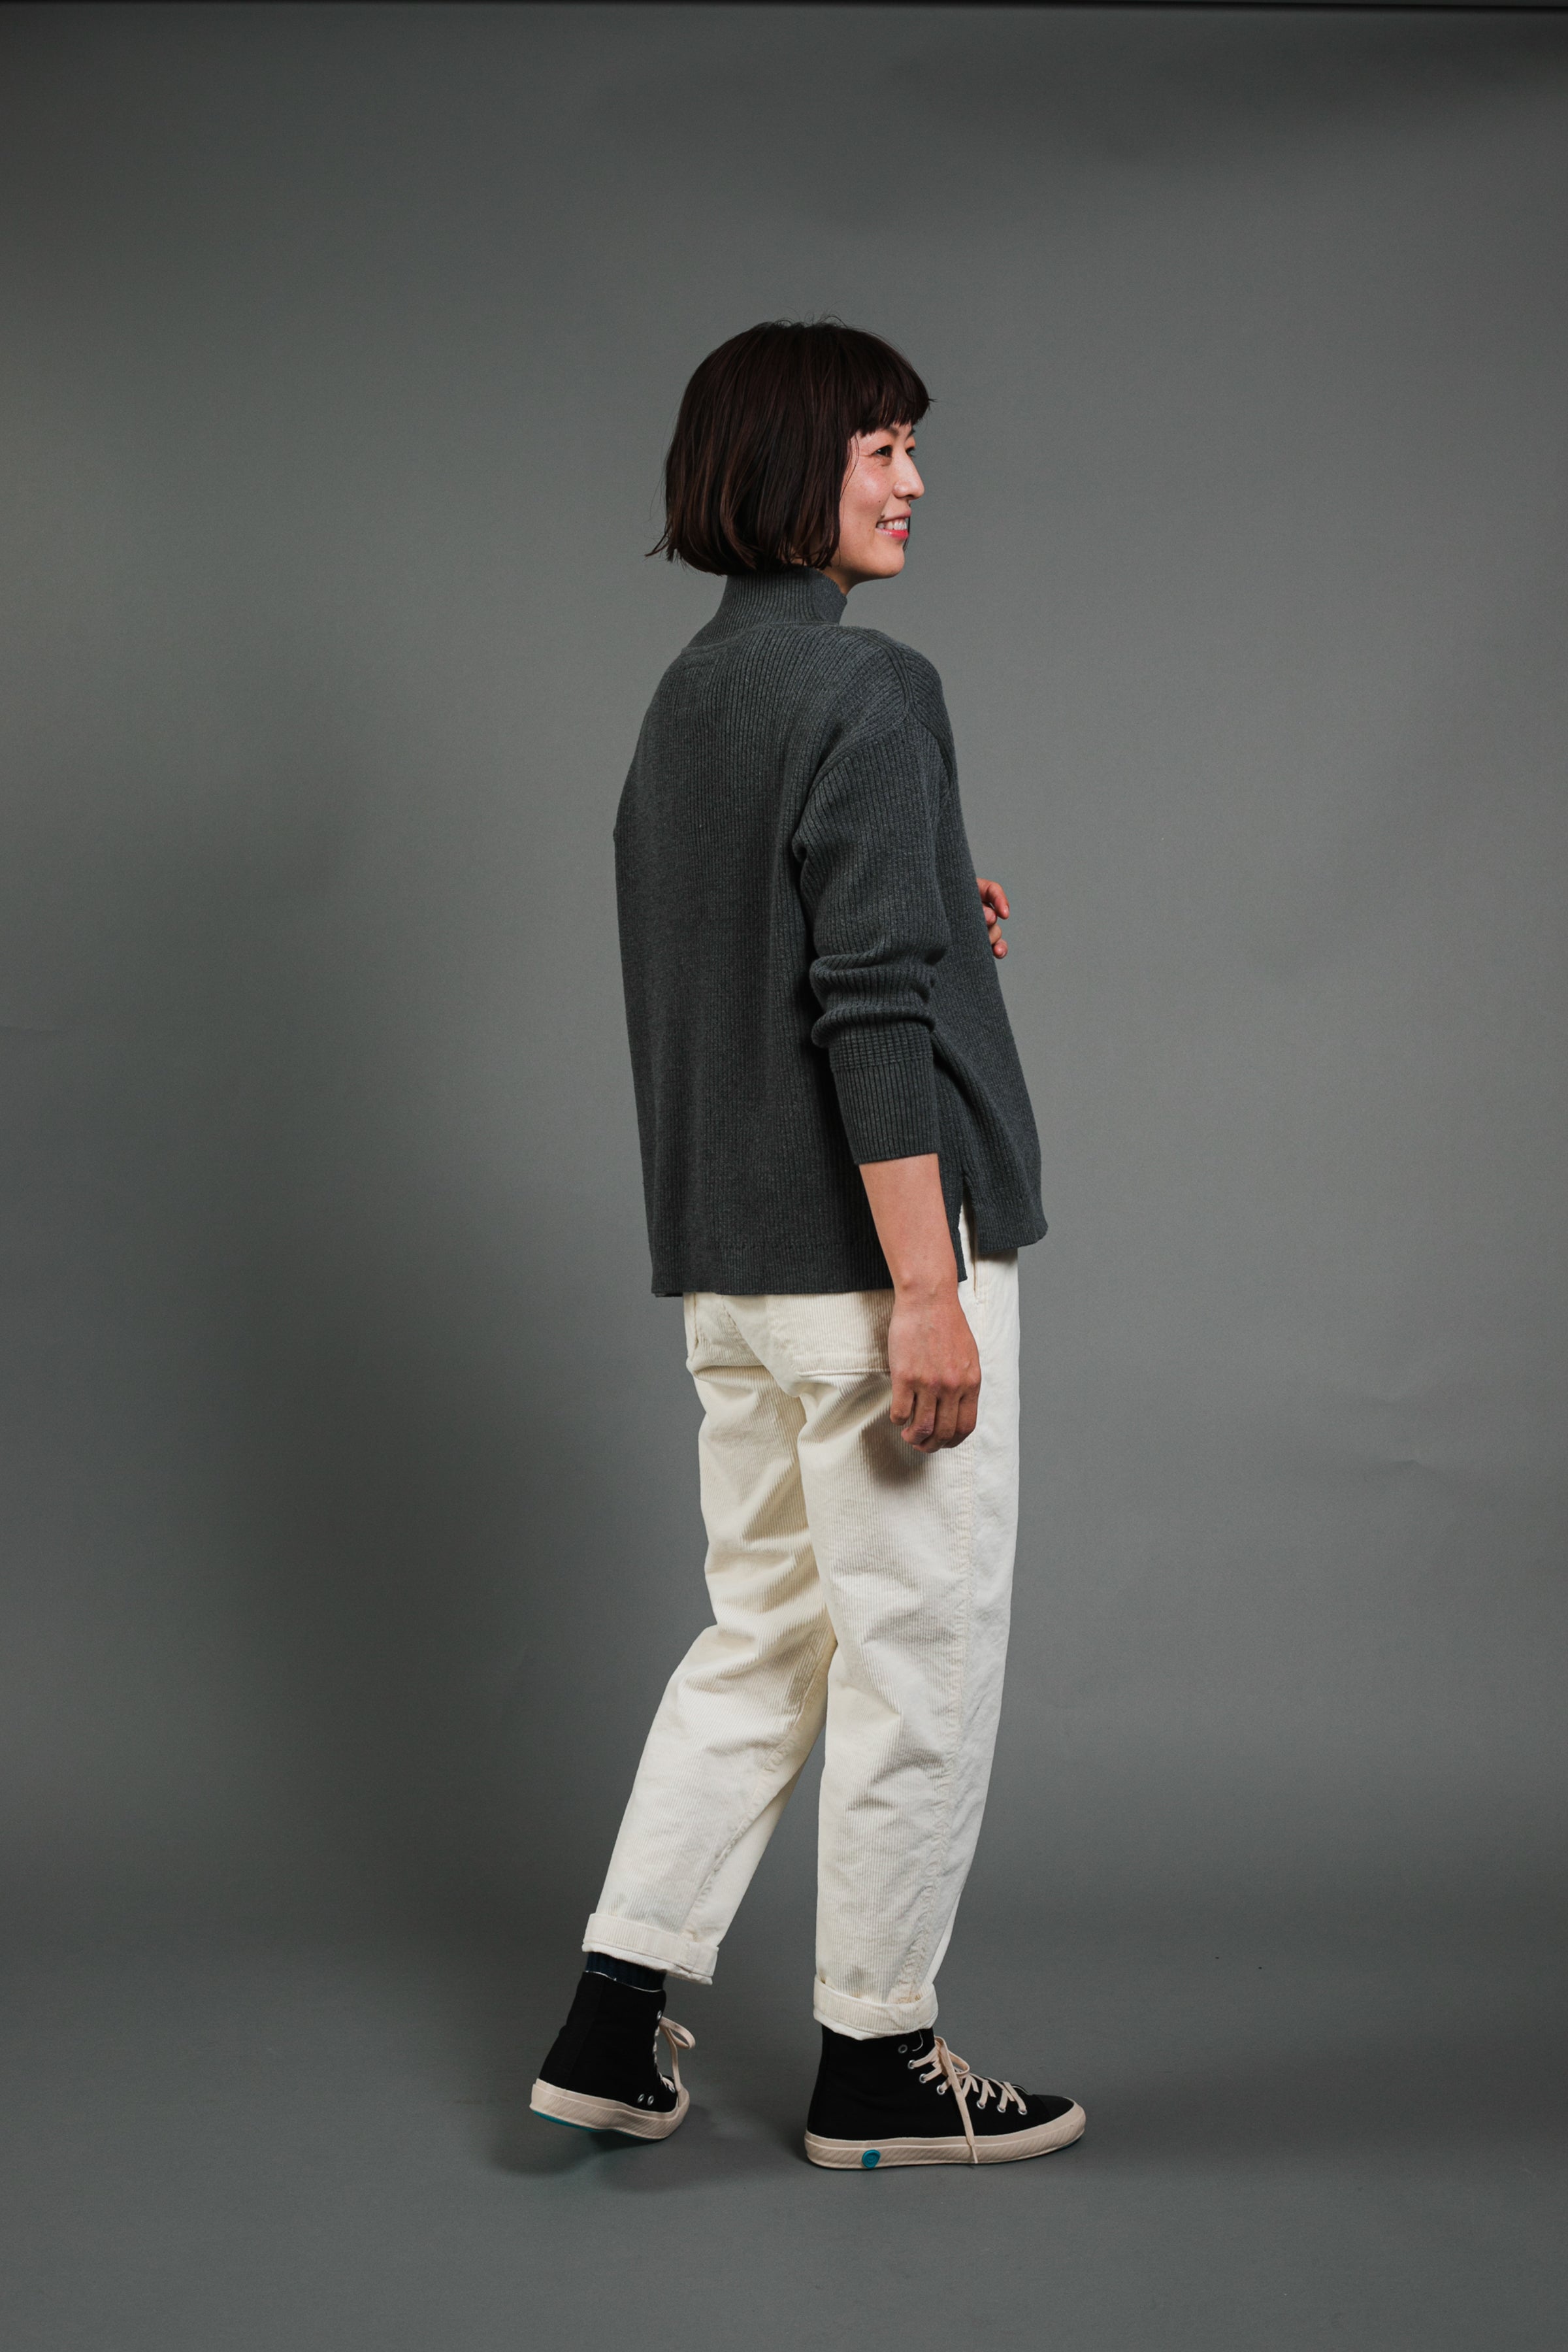 Cotton High-Necked Knit